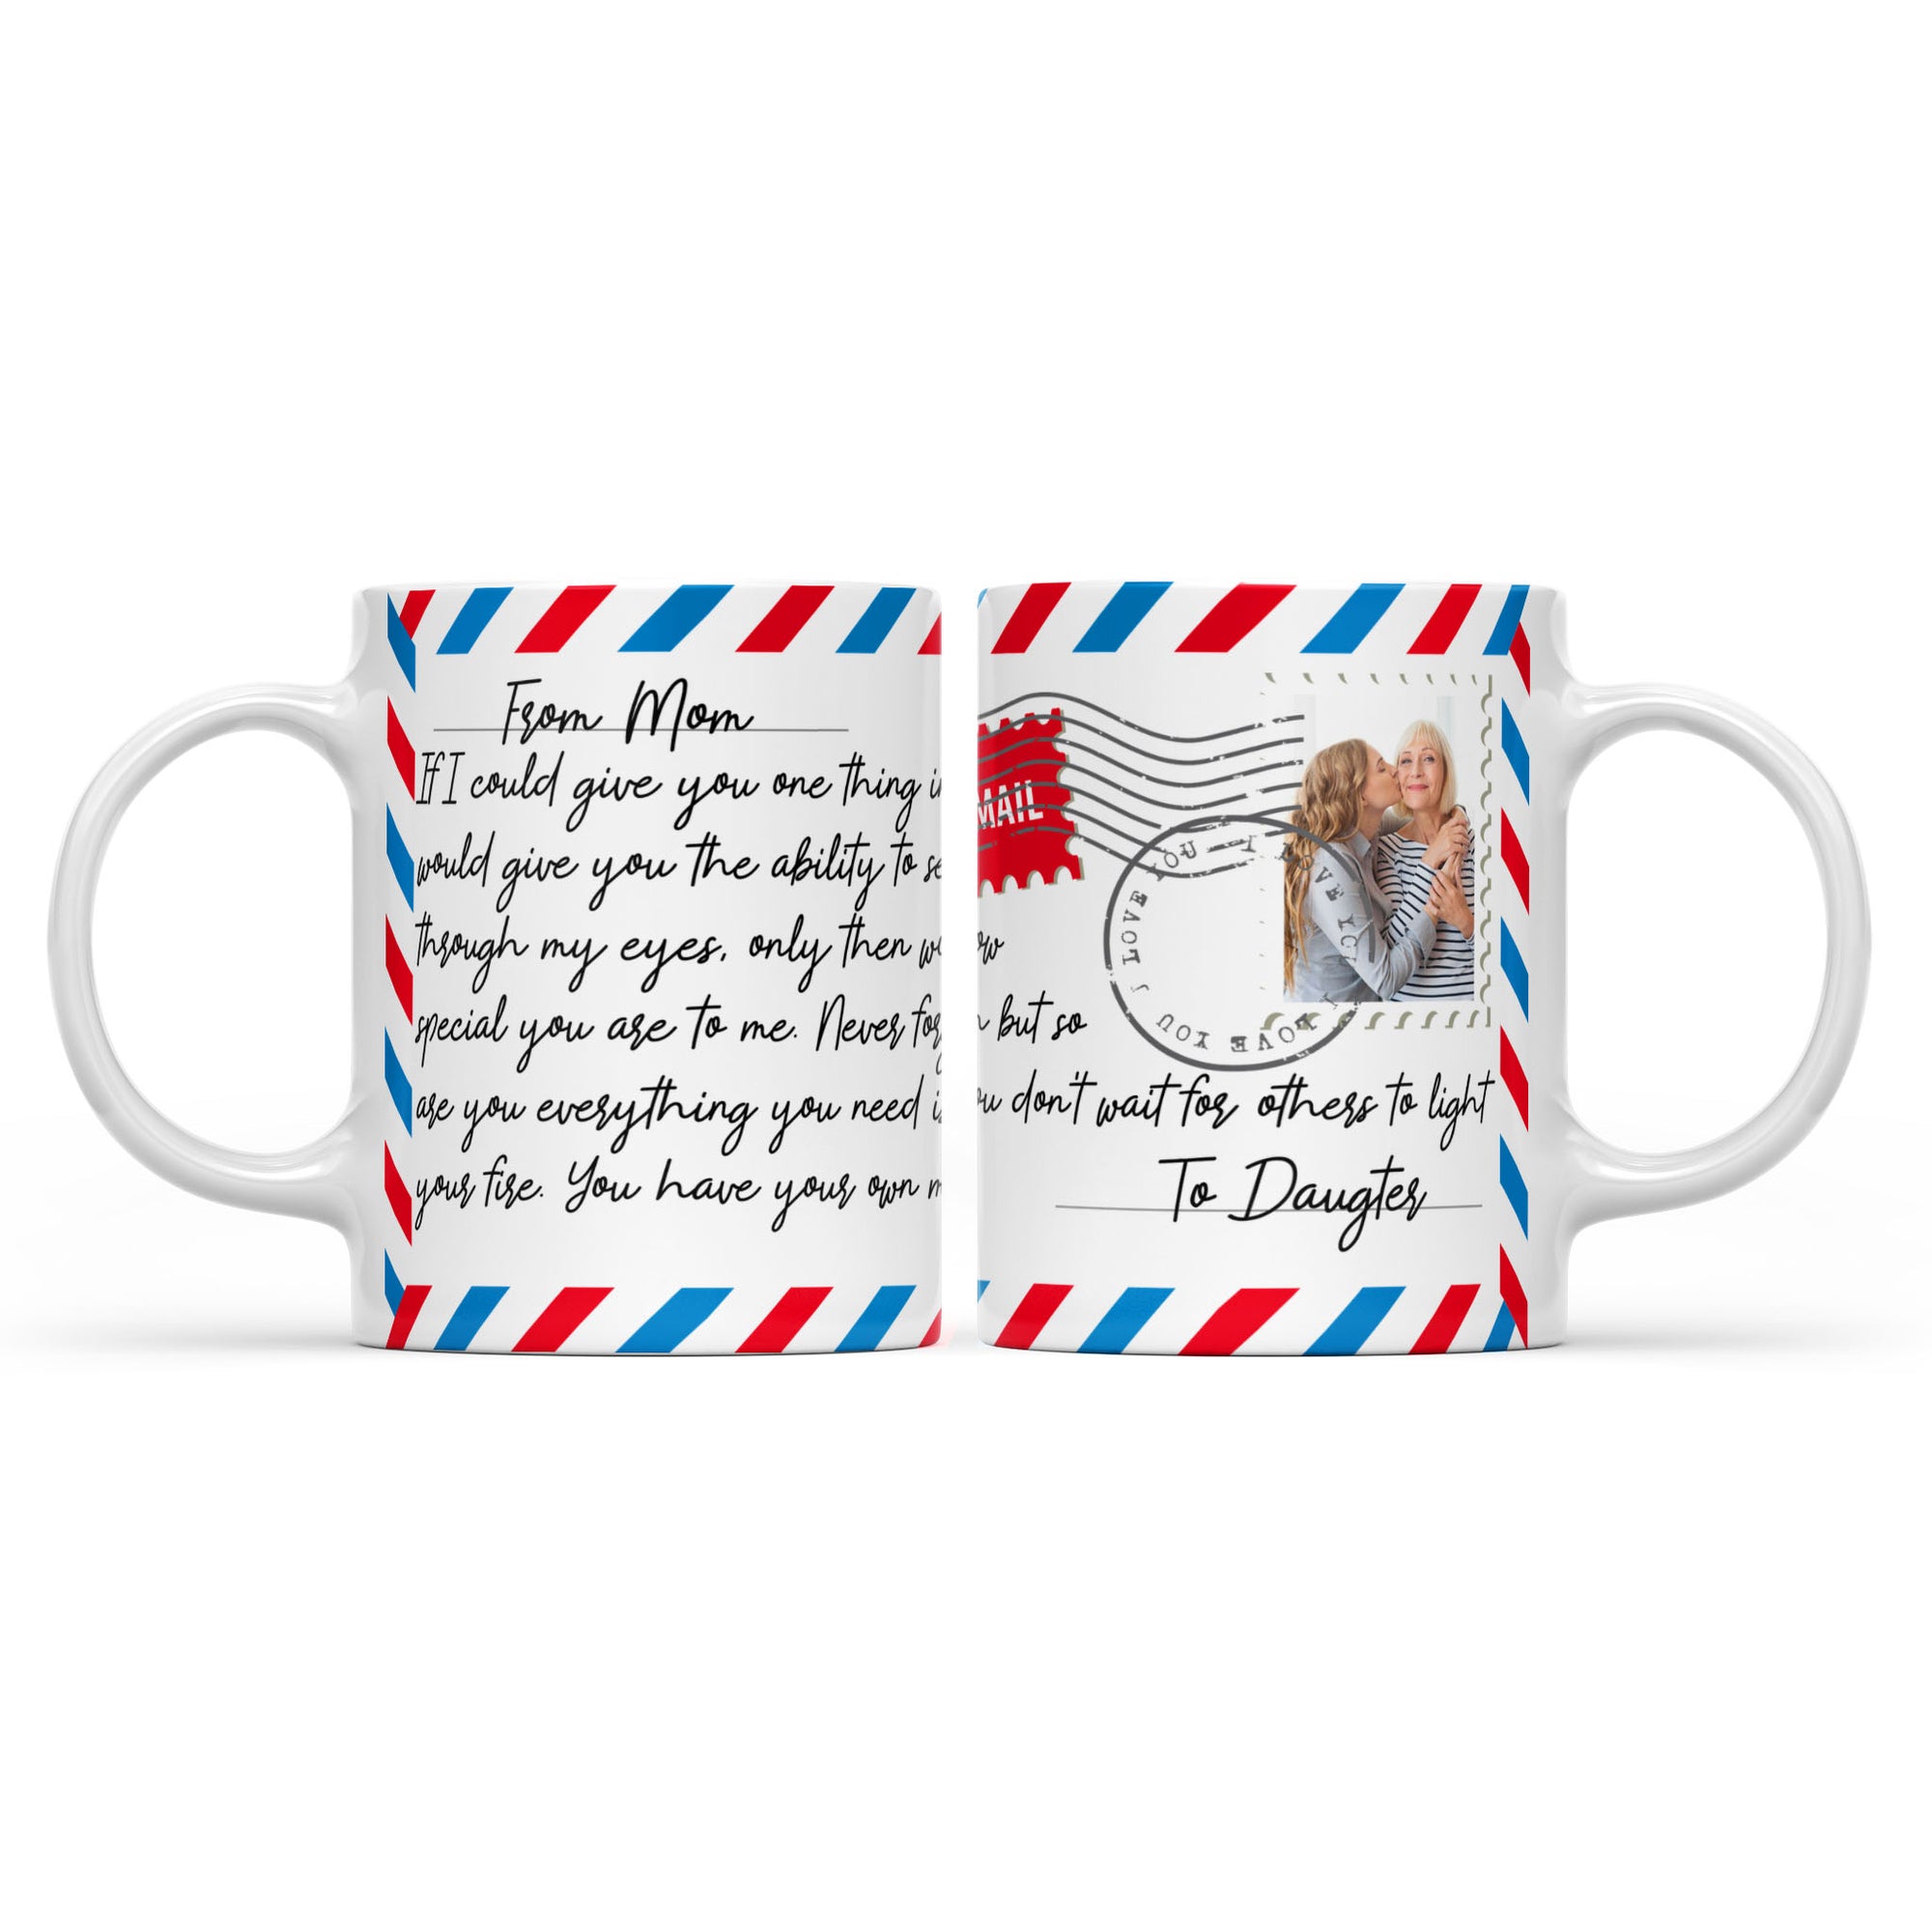 Mug Letter Gift Ideas for Daughter, Custom Message From Mother to Daughter Mug